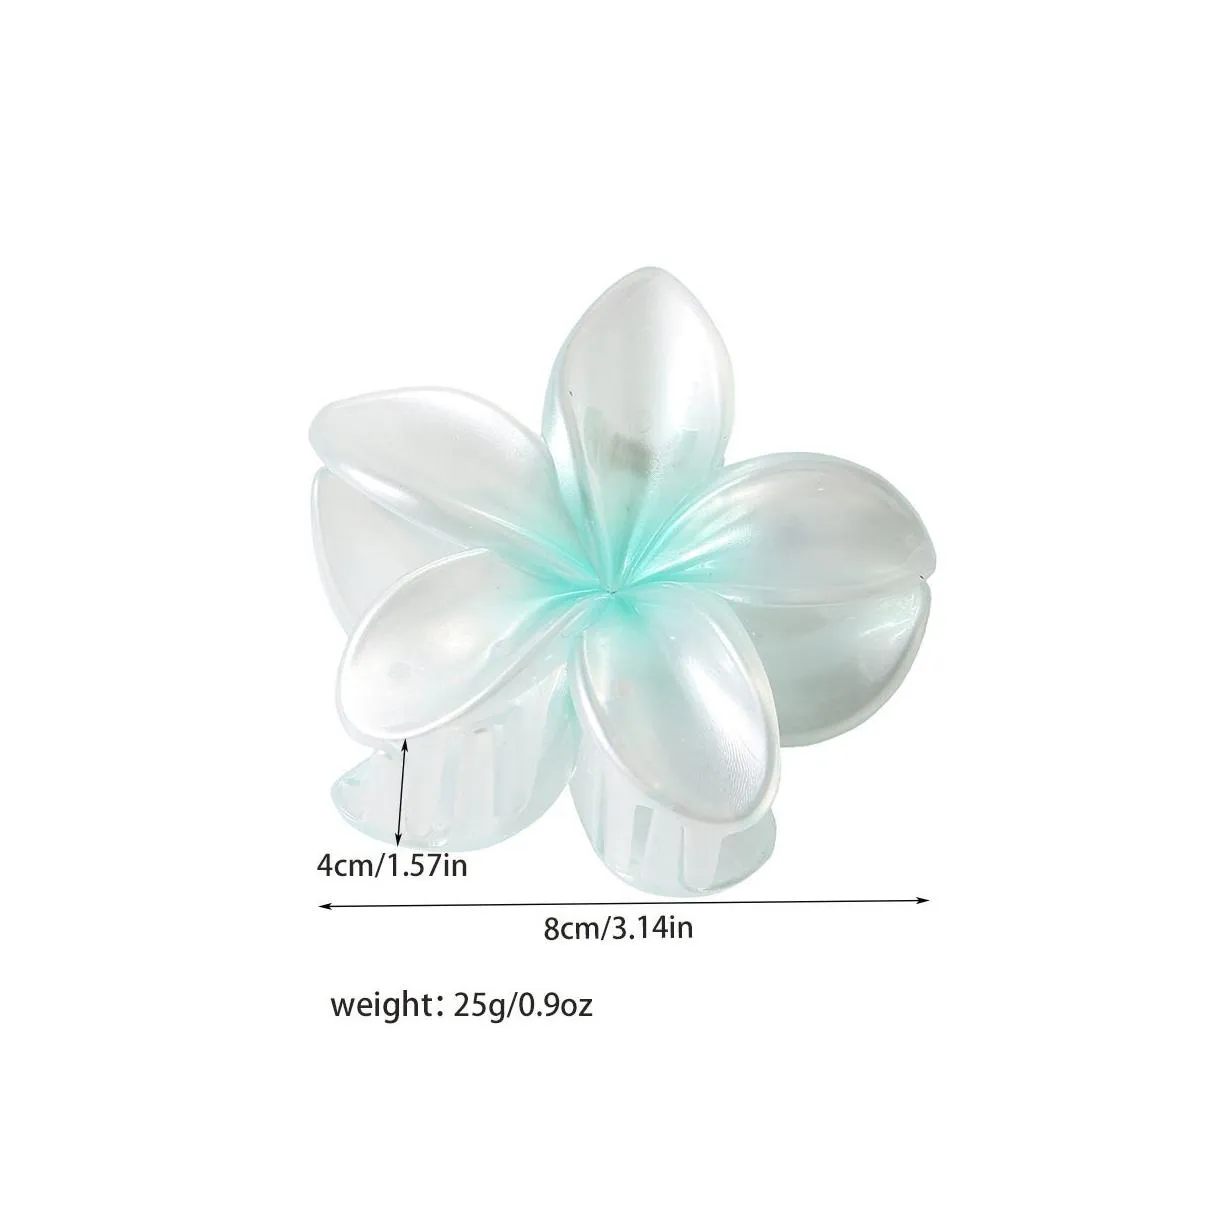 8cm Large Size Pearl Flower Hair Clip Claw Gradient Color Fashion Summer Hairpin Claws For Women Girls Ponytail Hair Claw Clip Headwear Accessories